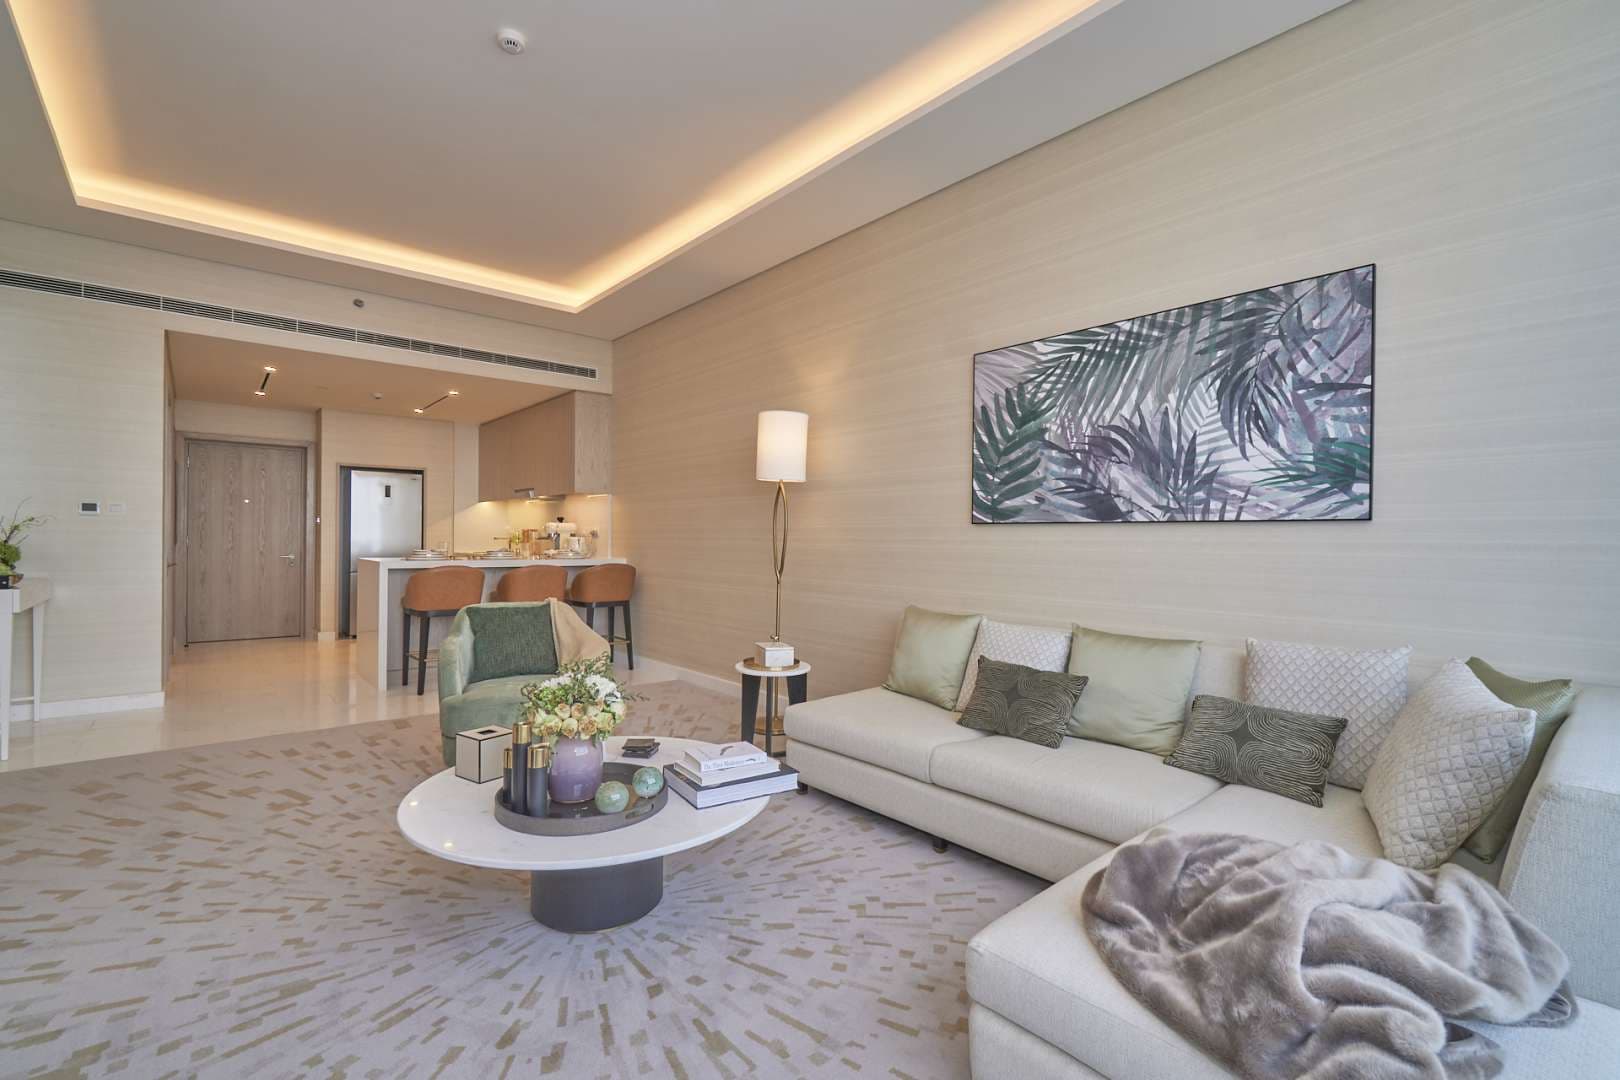 1 Bedroom Apartment For Sale The Palm Tower Lp07256 16994acae8a02800.jpg